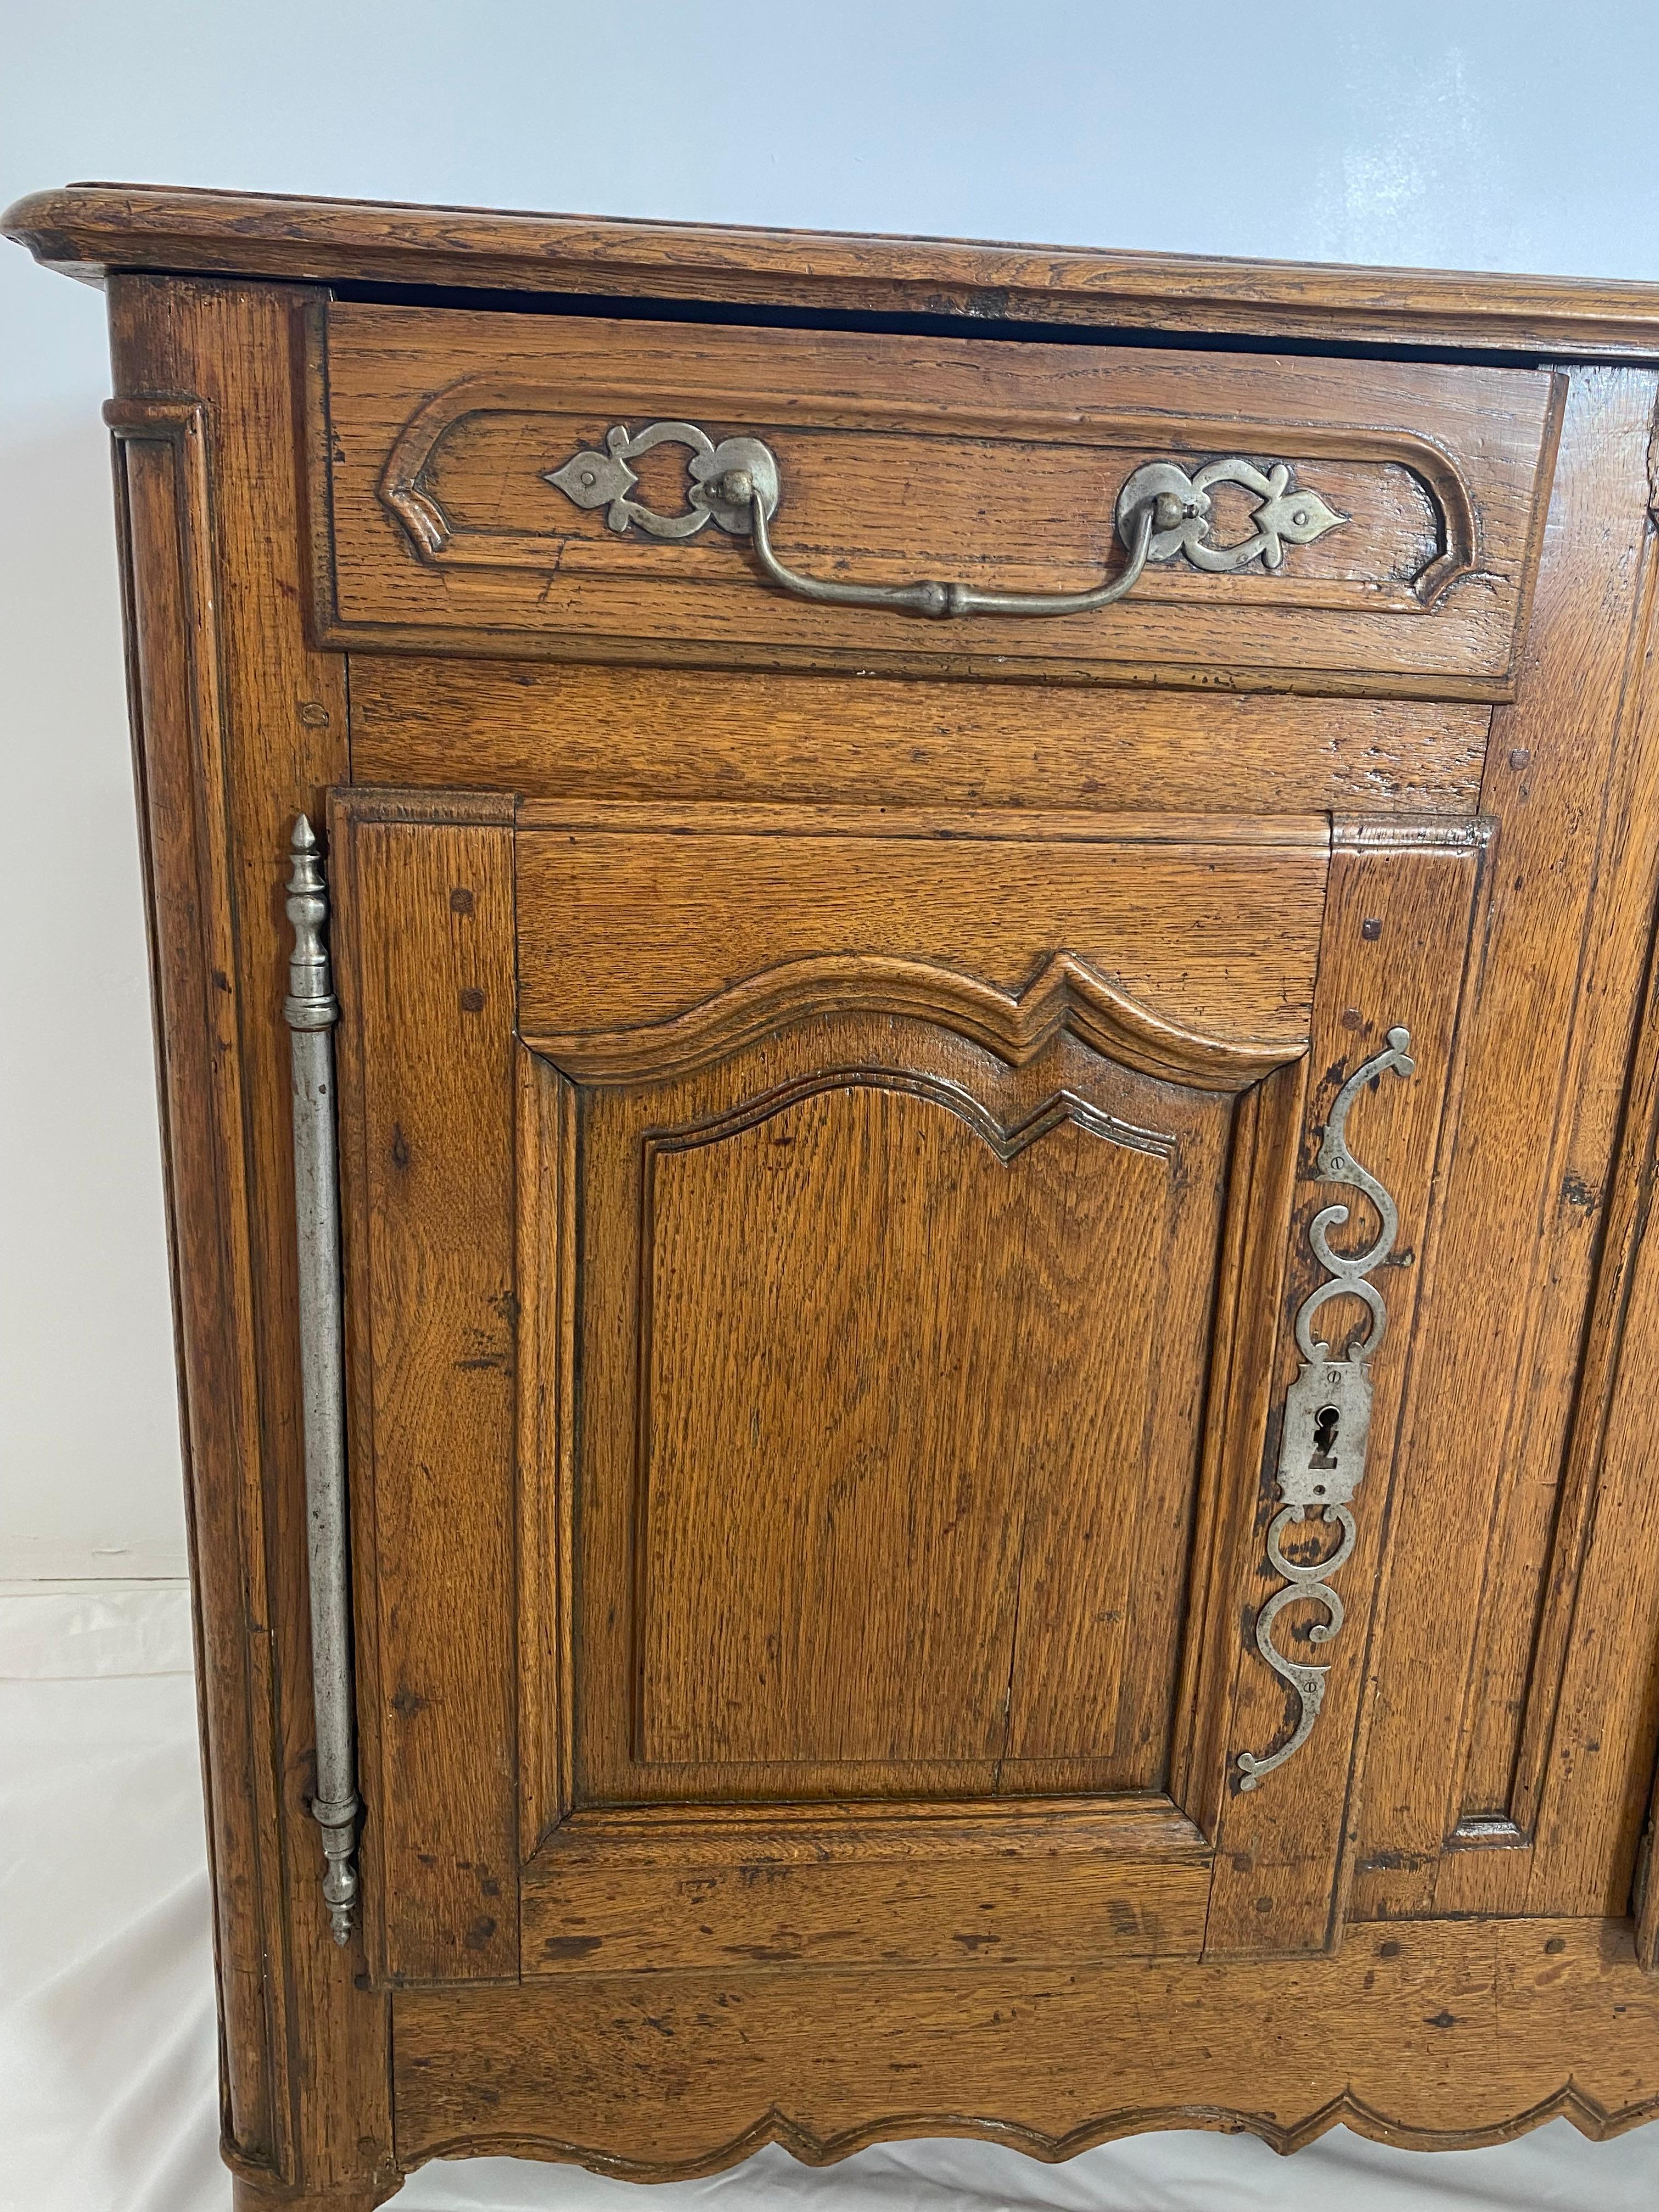 Eighteenth Century period Enfilade in oak. Circa 1760
Solid Oak, Beautifully Hand Carved, Dovetail Construction, Original Hardware, Handsomely Aged Formidable Finish.